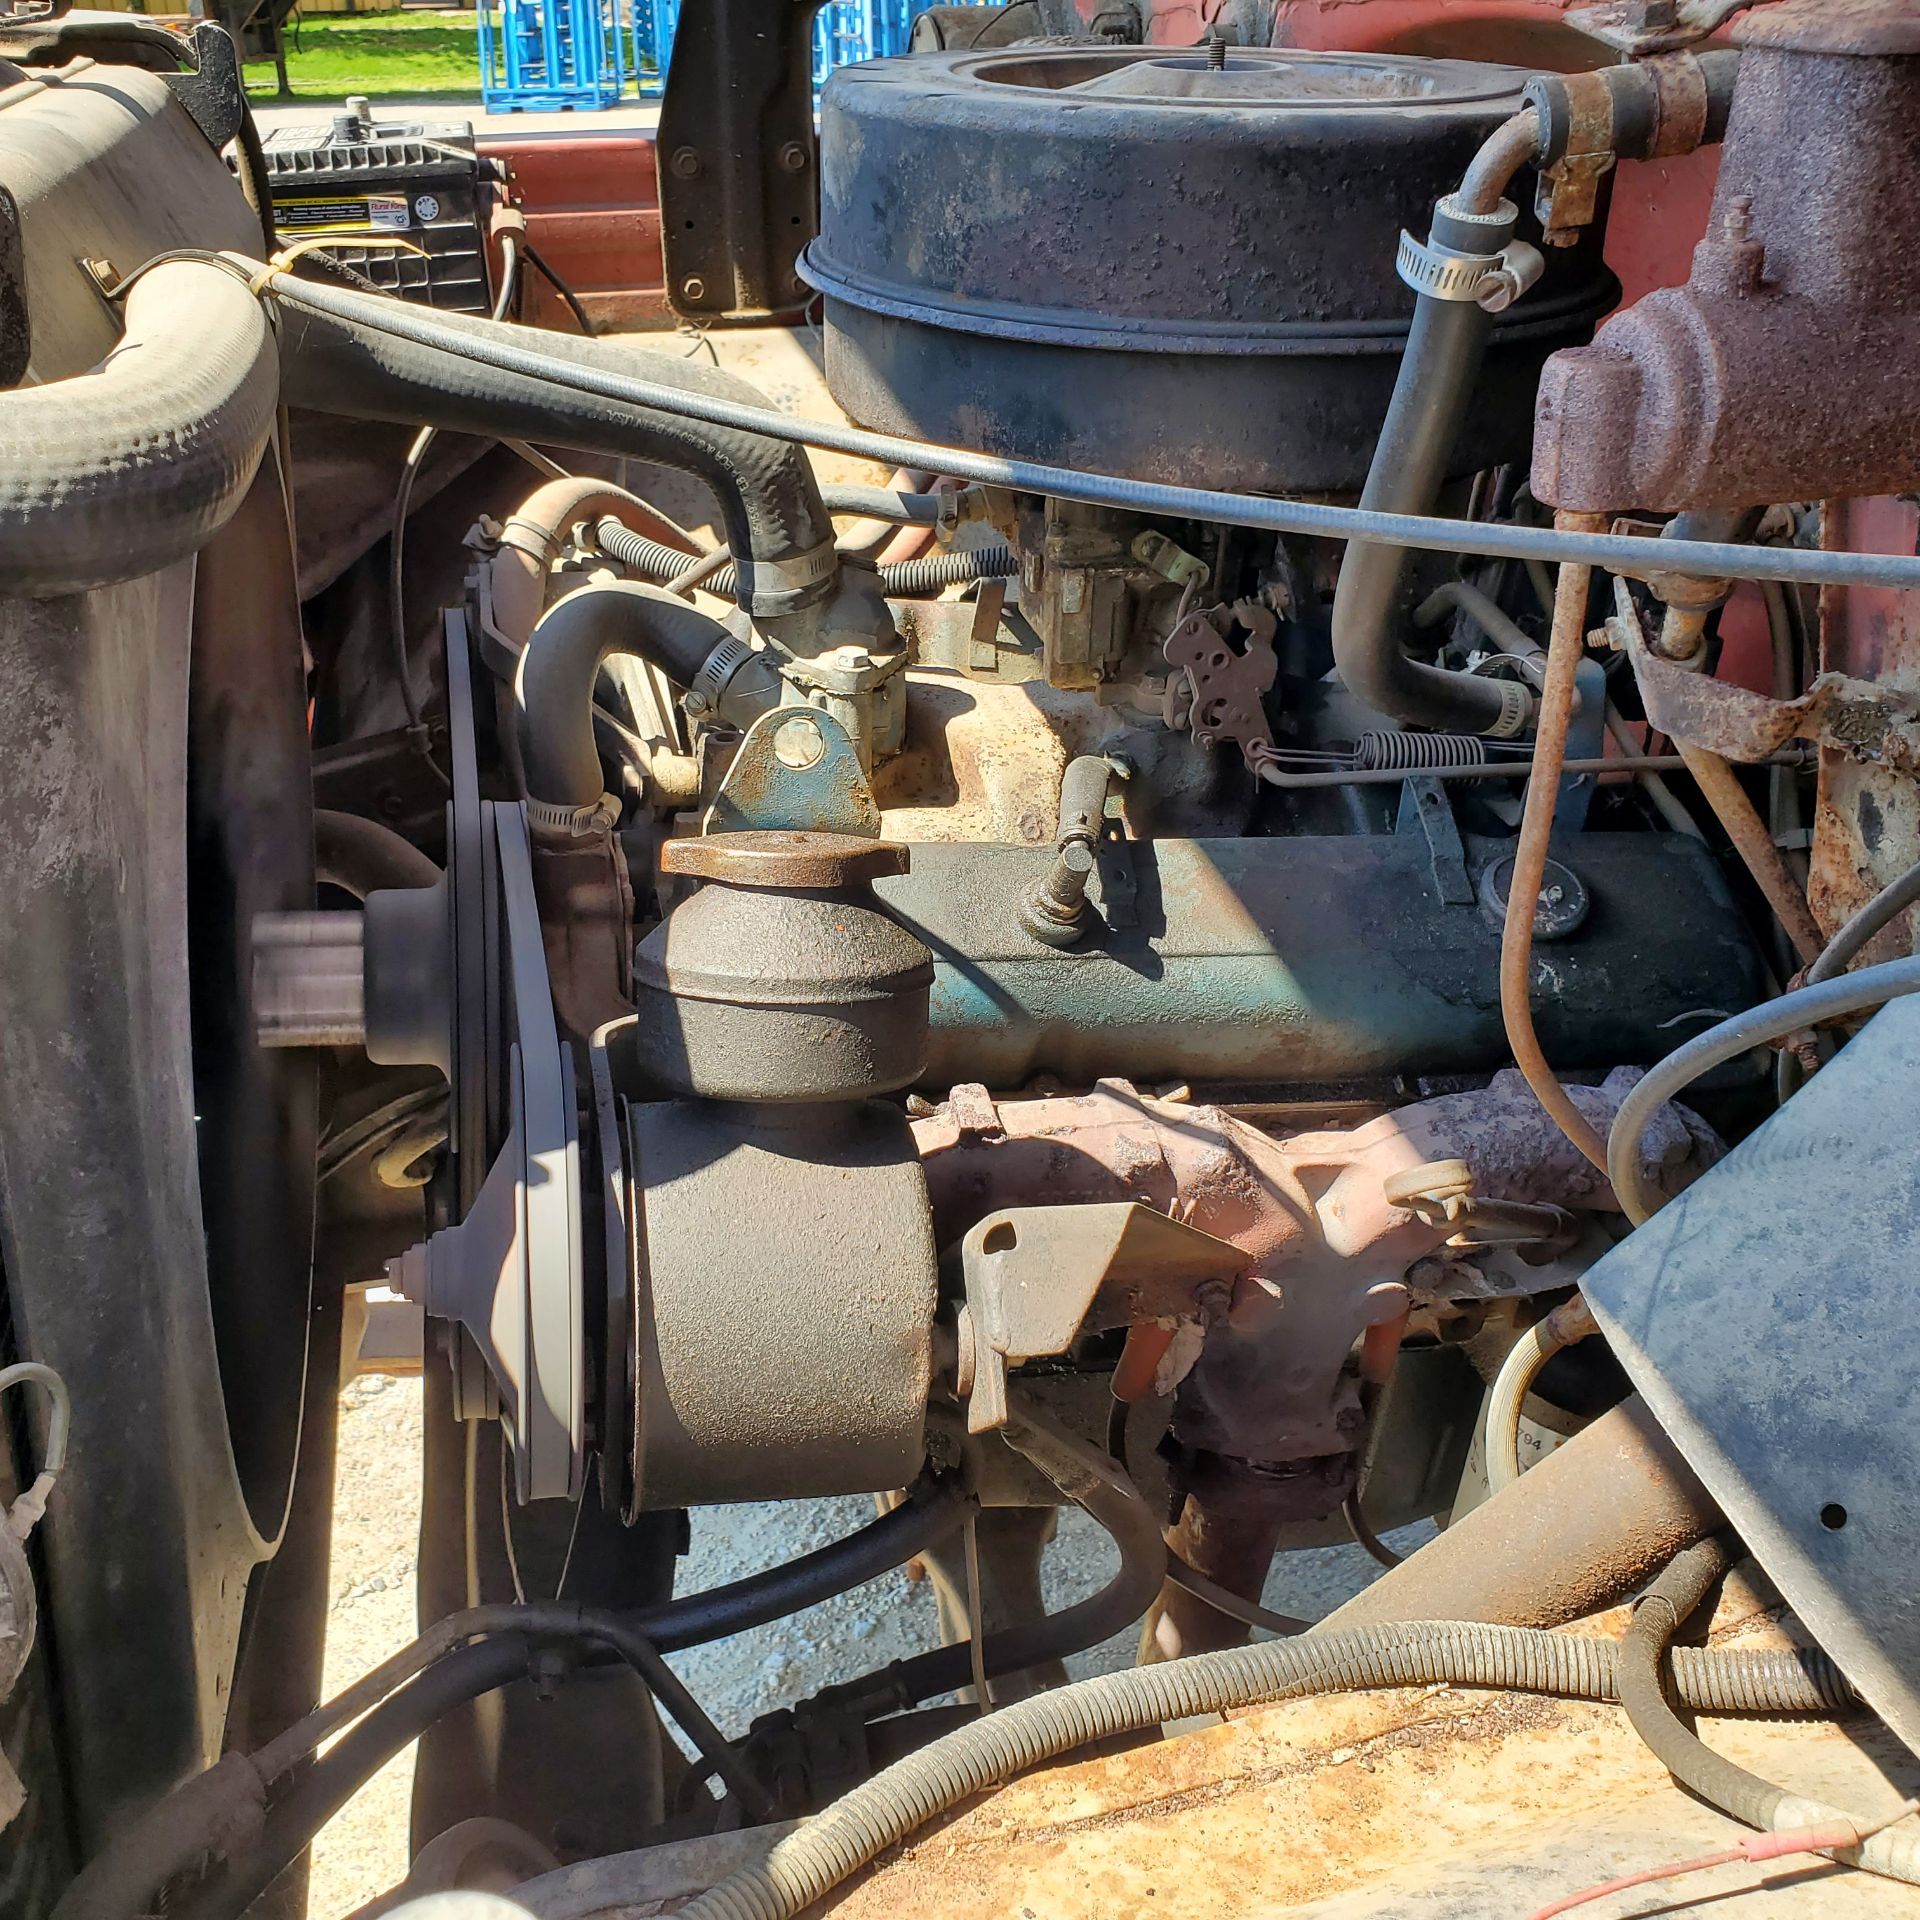 1977 Chevrolet C60 Cab and Chassis, Single Axle w/ Dual Tires and Tag Axle, 5 Speed Transmission - Image 12 of 19